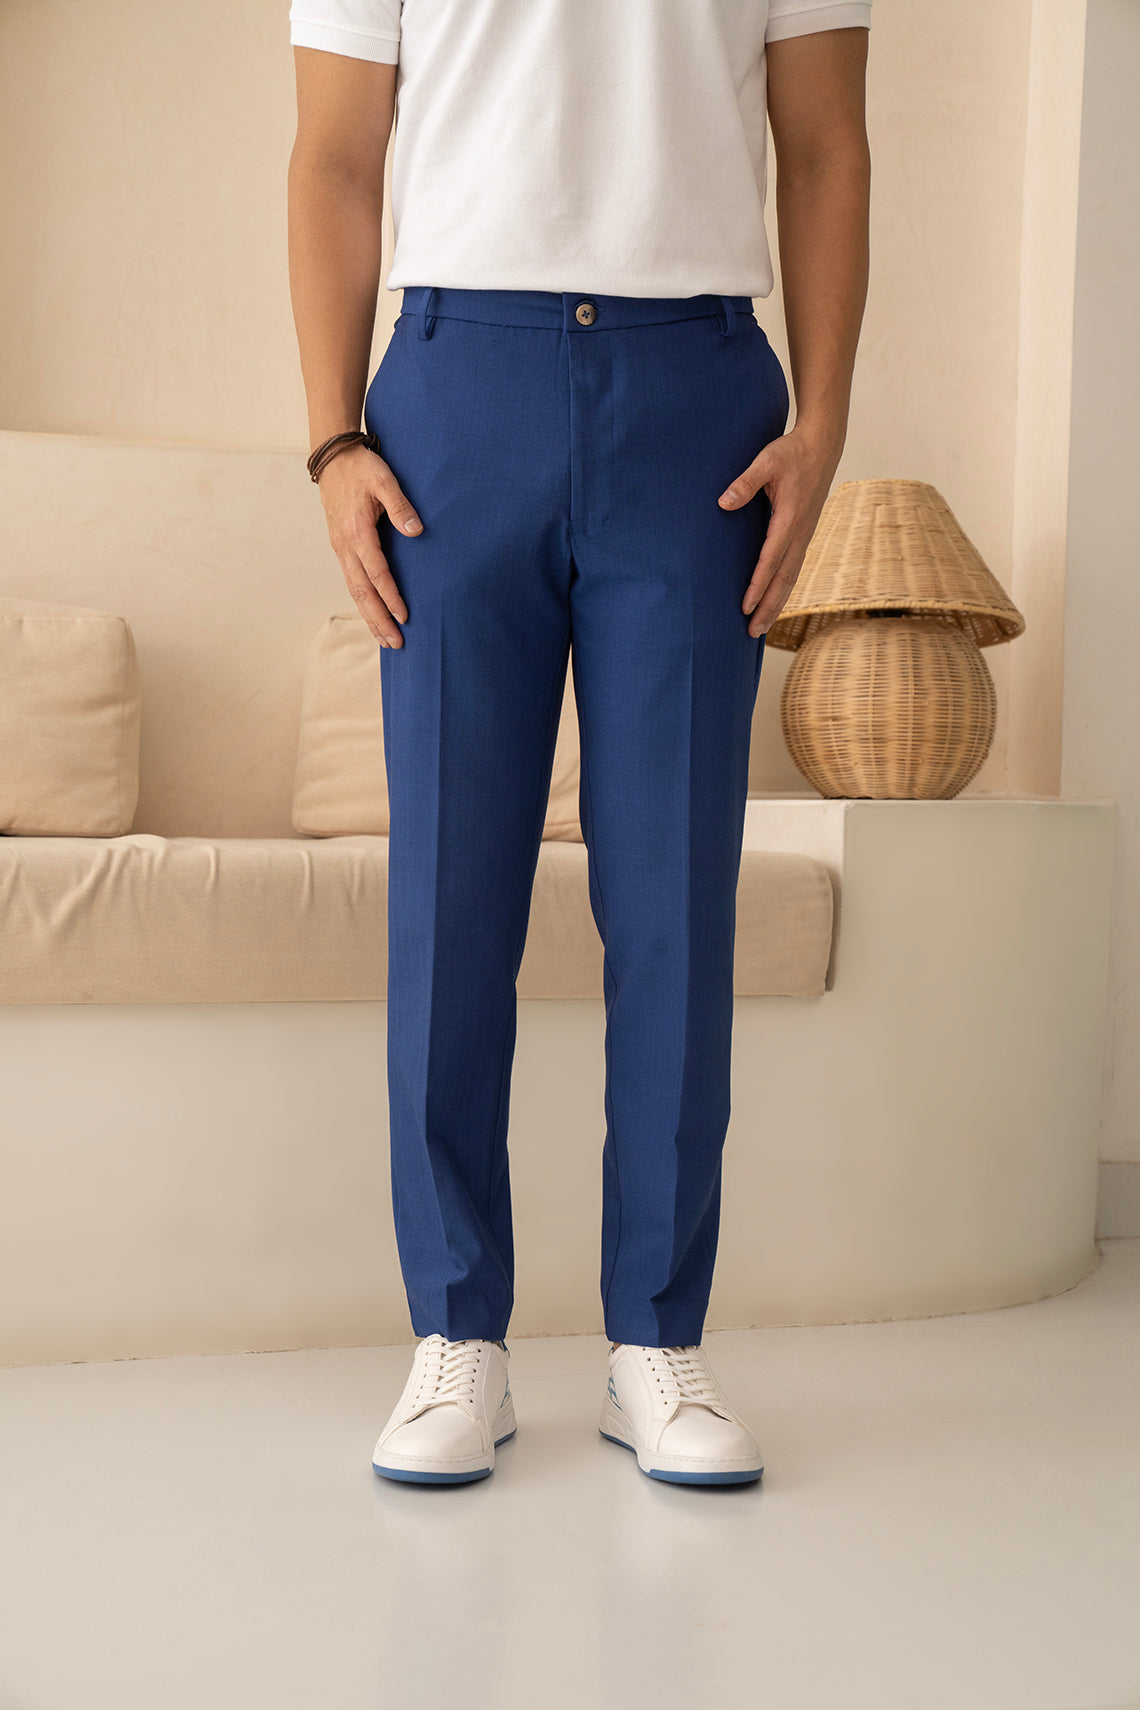 Buy CLITHS Navy Blue Formal Pants for Men Slim Fit/Flat Front Fromal  Trousers for Men Cotton at Amazon.in